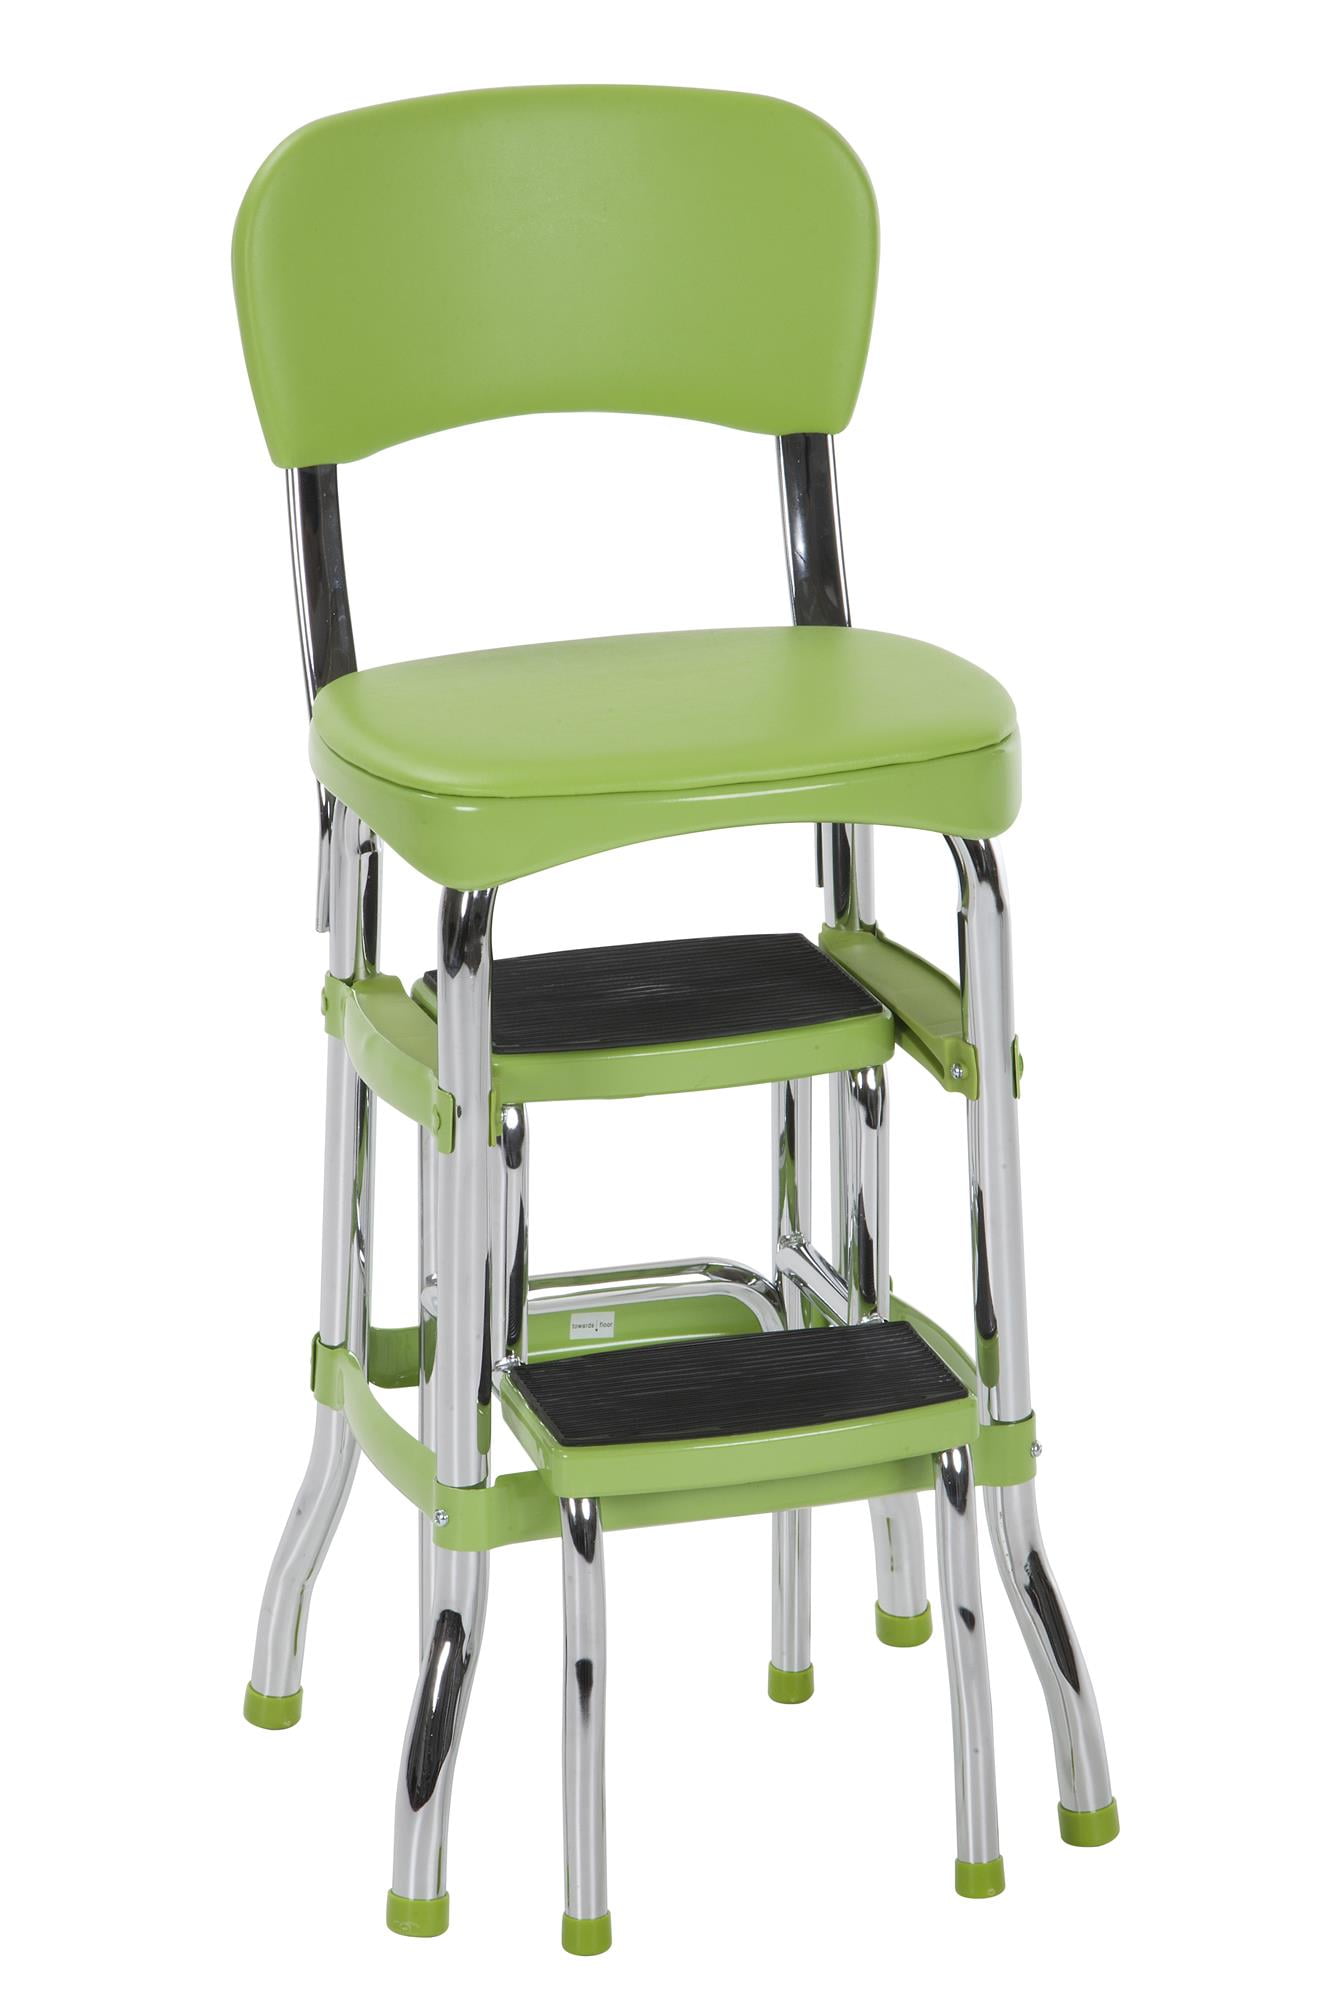 Extra-Tall Jumbo Step Stool with Removable Non-Slip Caps and Anti-Slip Rubber Grips Tenby Living 2-Pack Green and Orange Extra-Wide